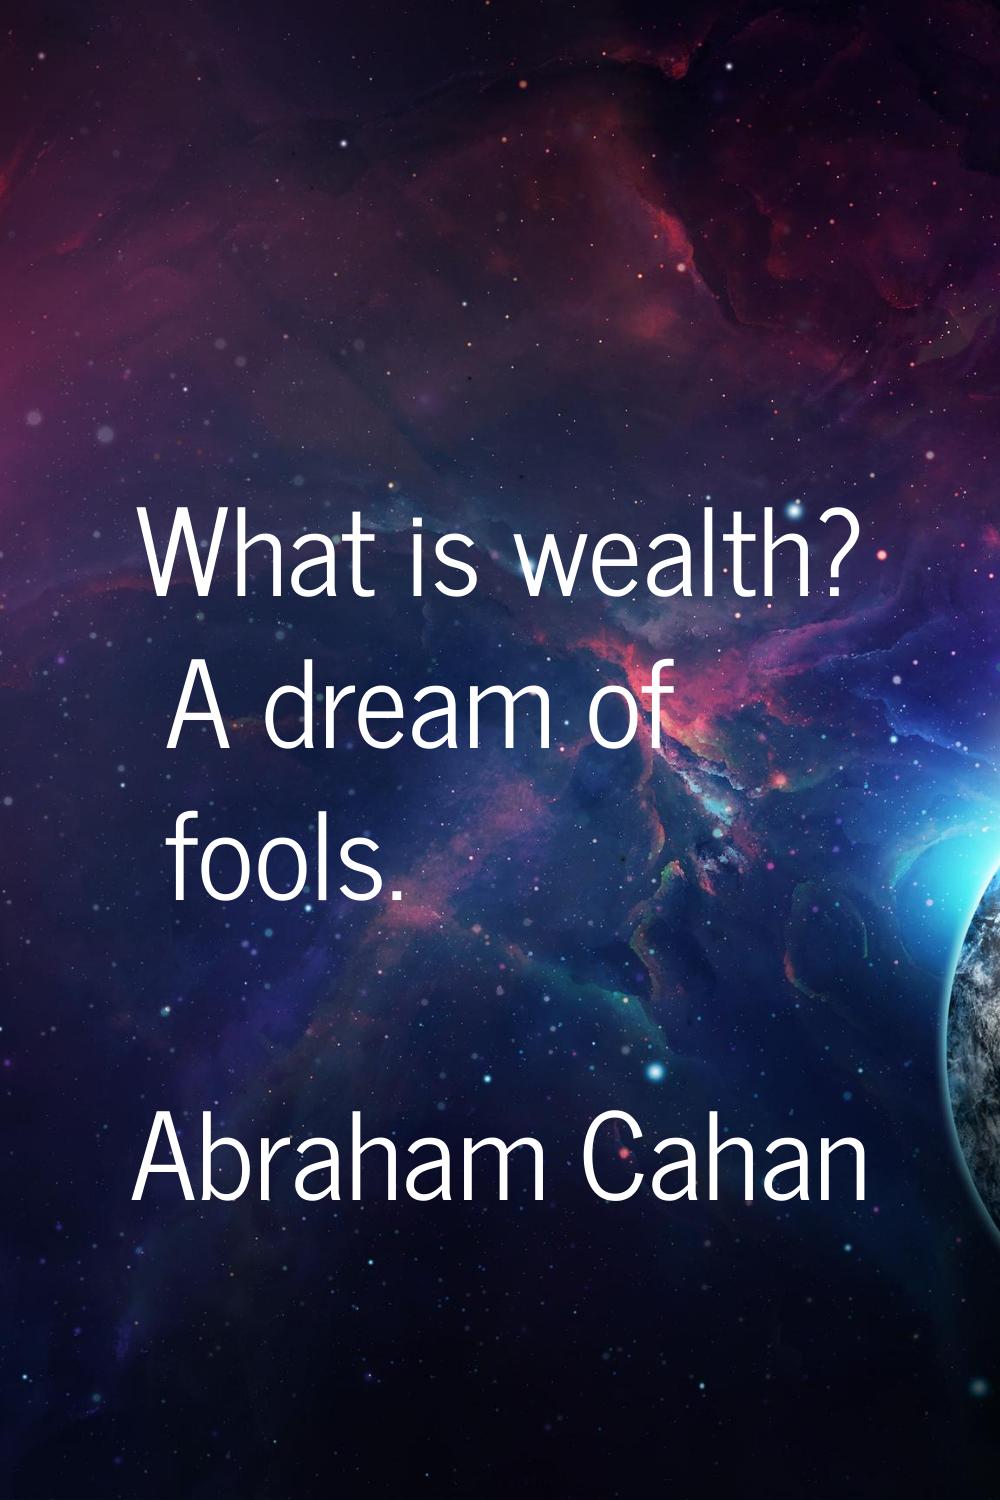 What is wealth? A dream of fools.